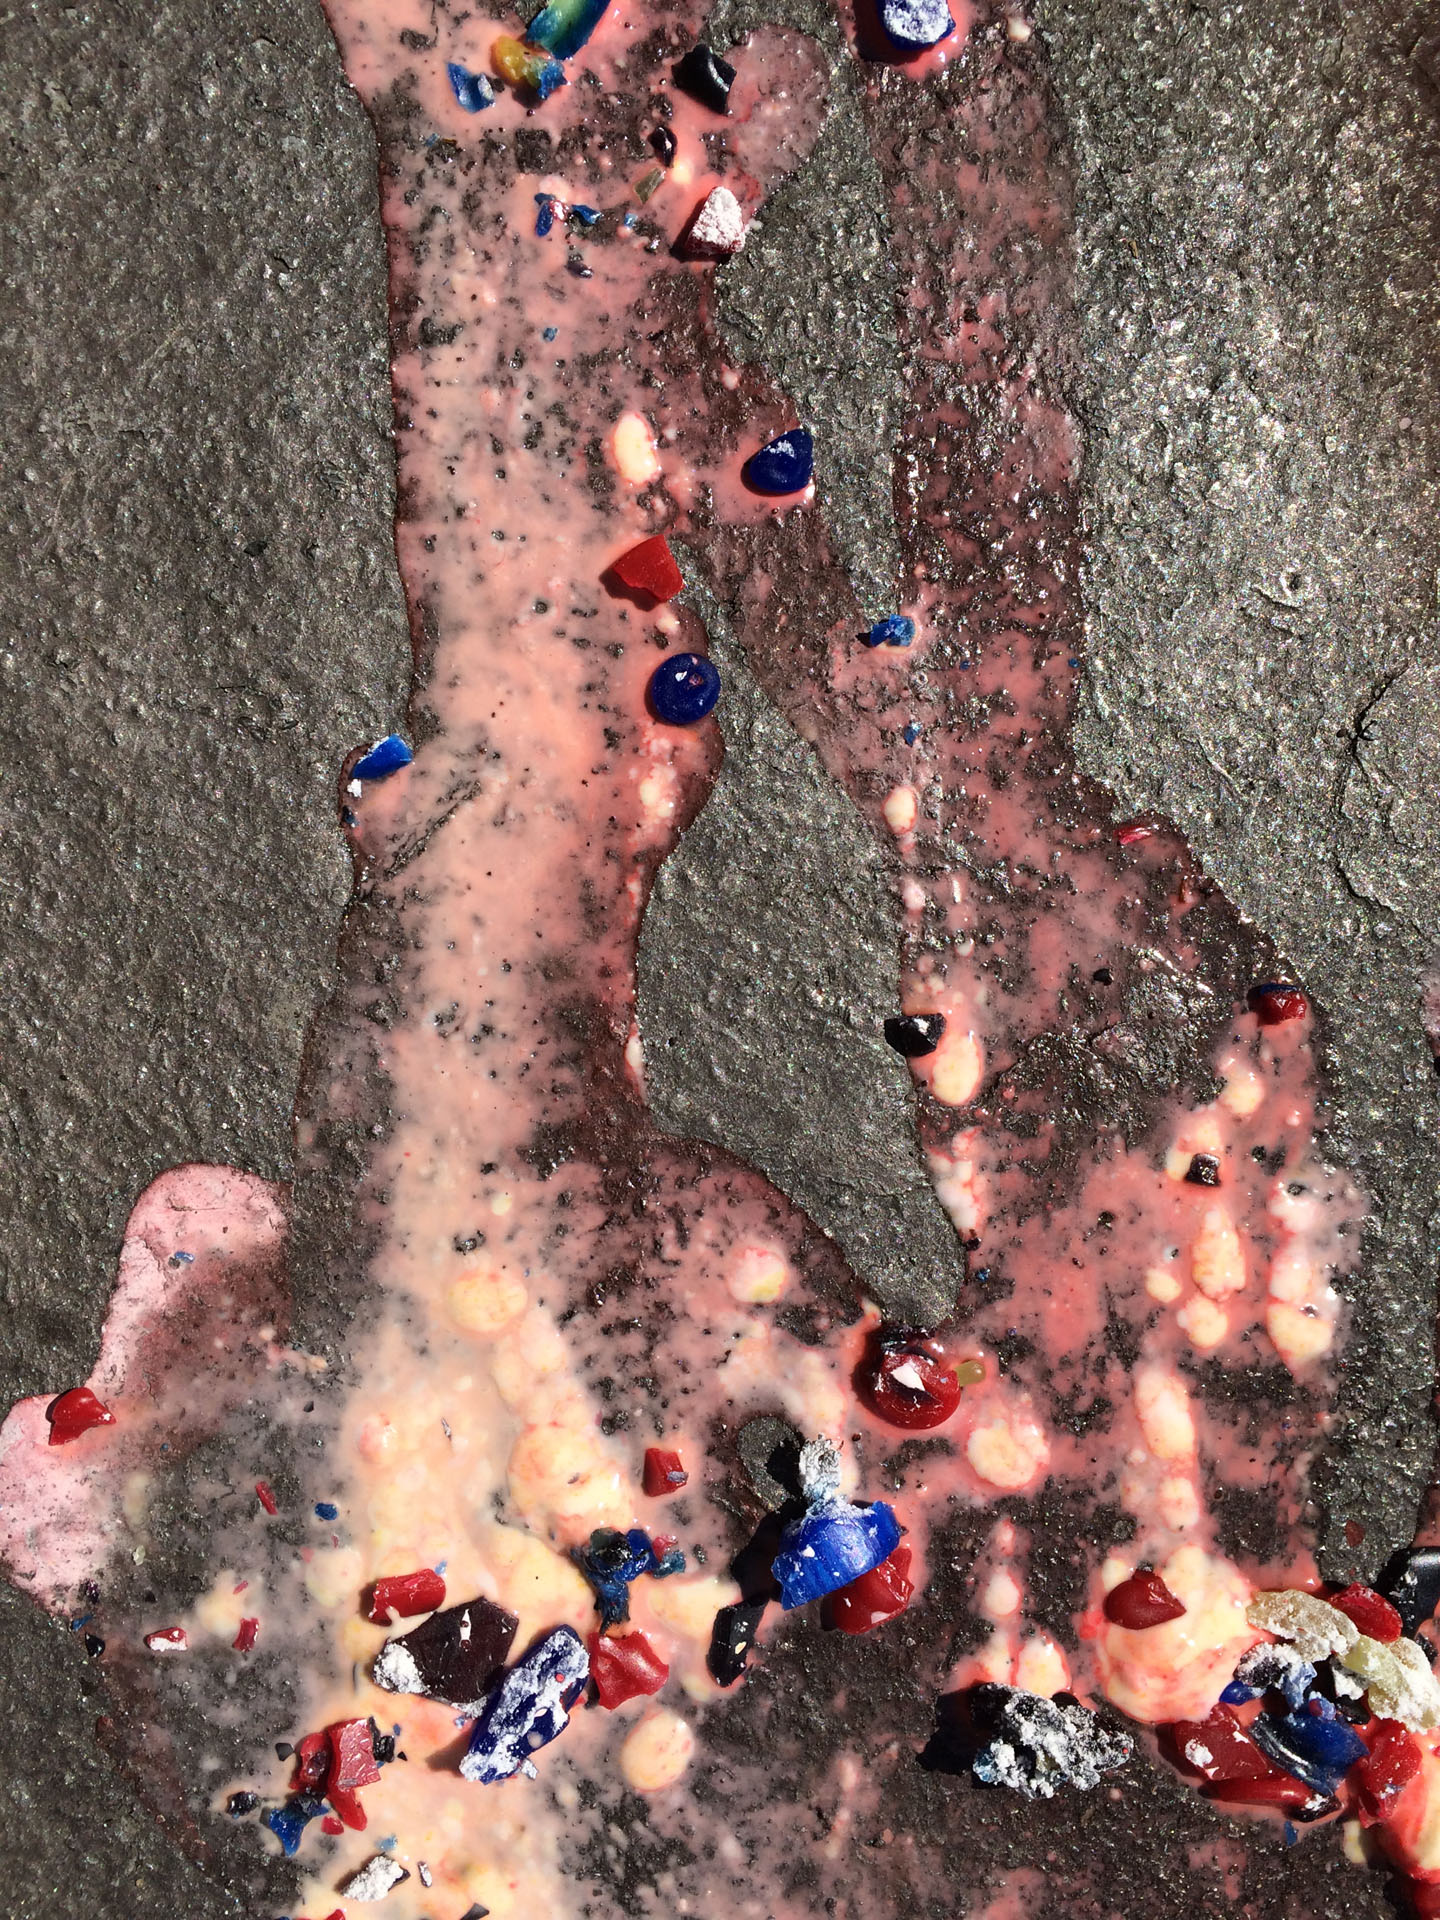 A stream of gloopy pink liquid with some colourful fragments in it